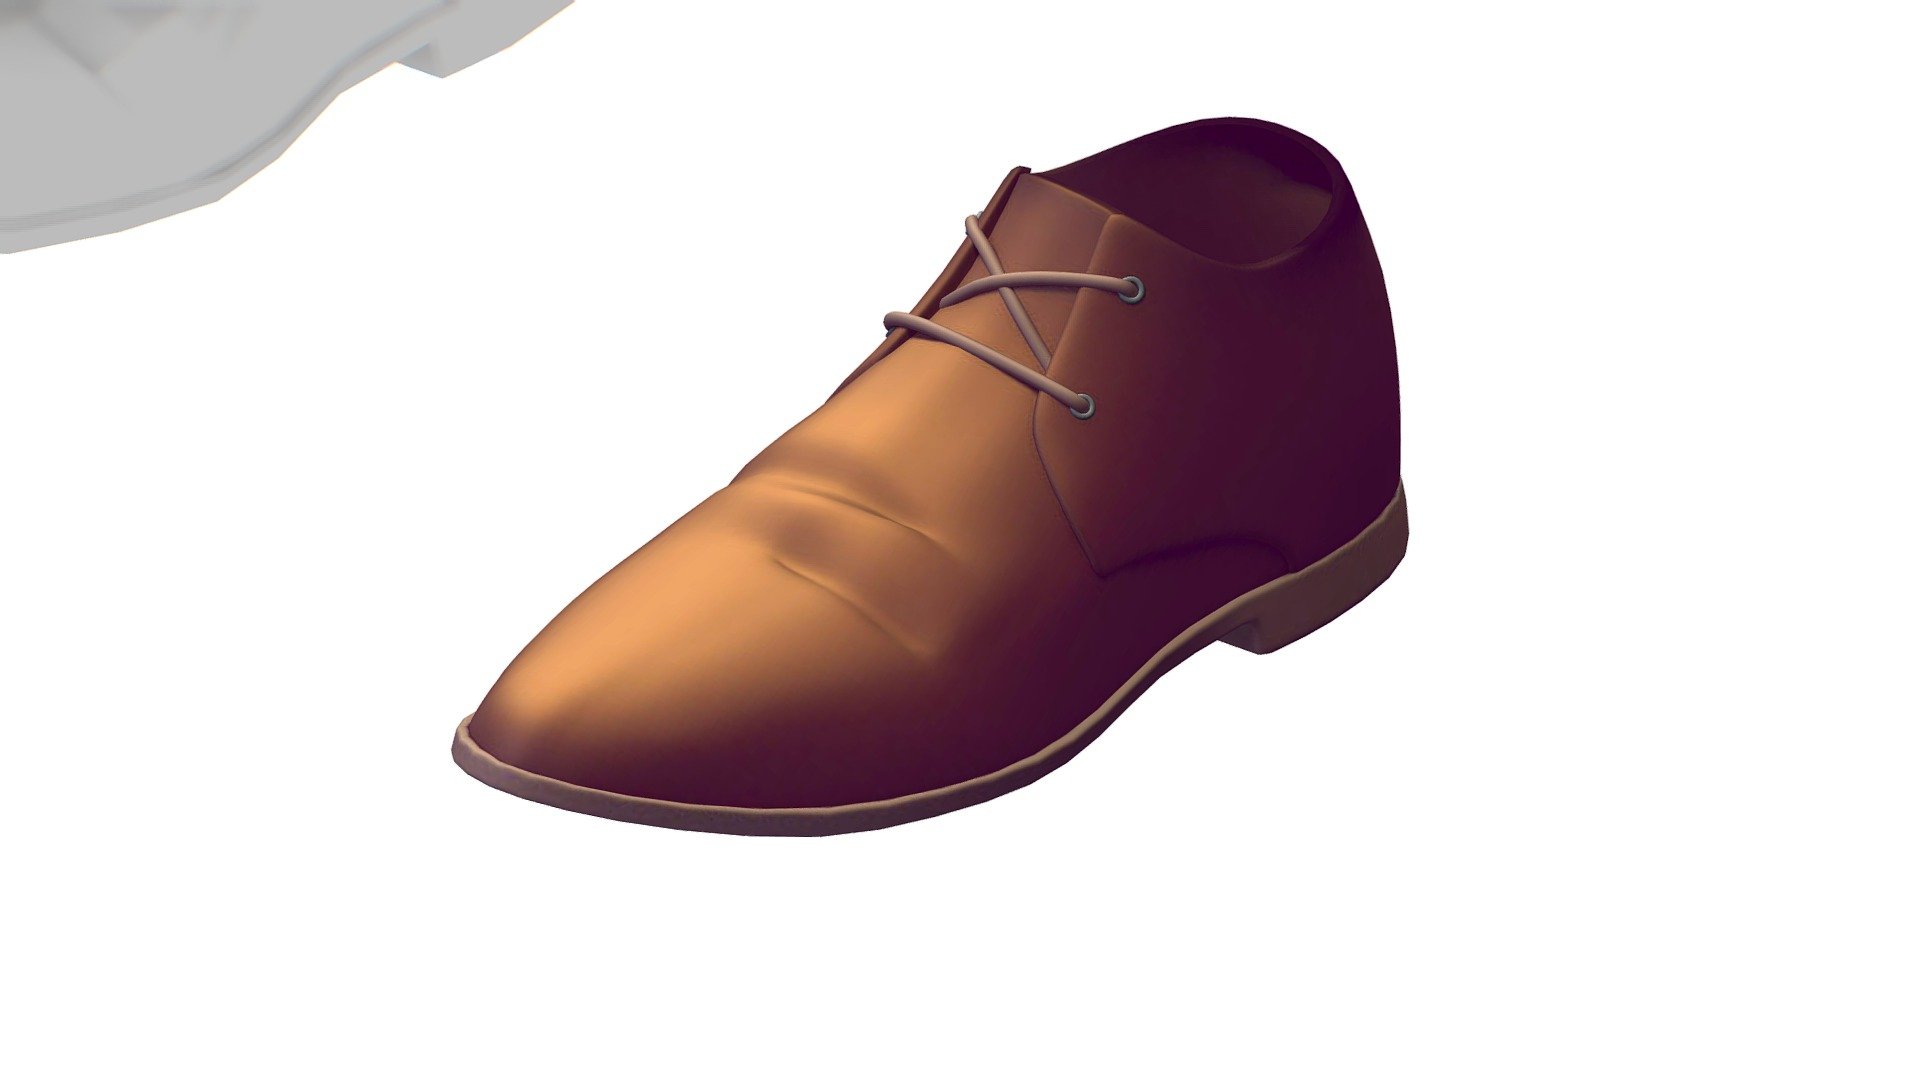 Cartoon High Poly Subdivision Brown Shoes

No HDRI map, No Light, No material settings - only Diffuse/Color Map Texture (3000x3000) 

More information about the 3D model: please use the Sketchfab Model Inspector - Key (i) - Cartoon High Poly Subdivision Brown Shoes - Buy Royalty Free 3D model by Oleg Shuldiakov (@olegshuldiakov) 3d model